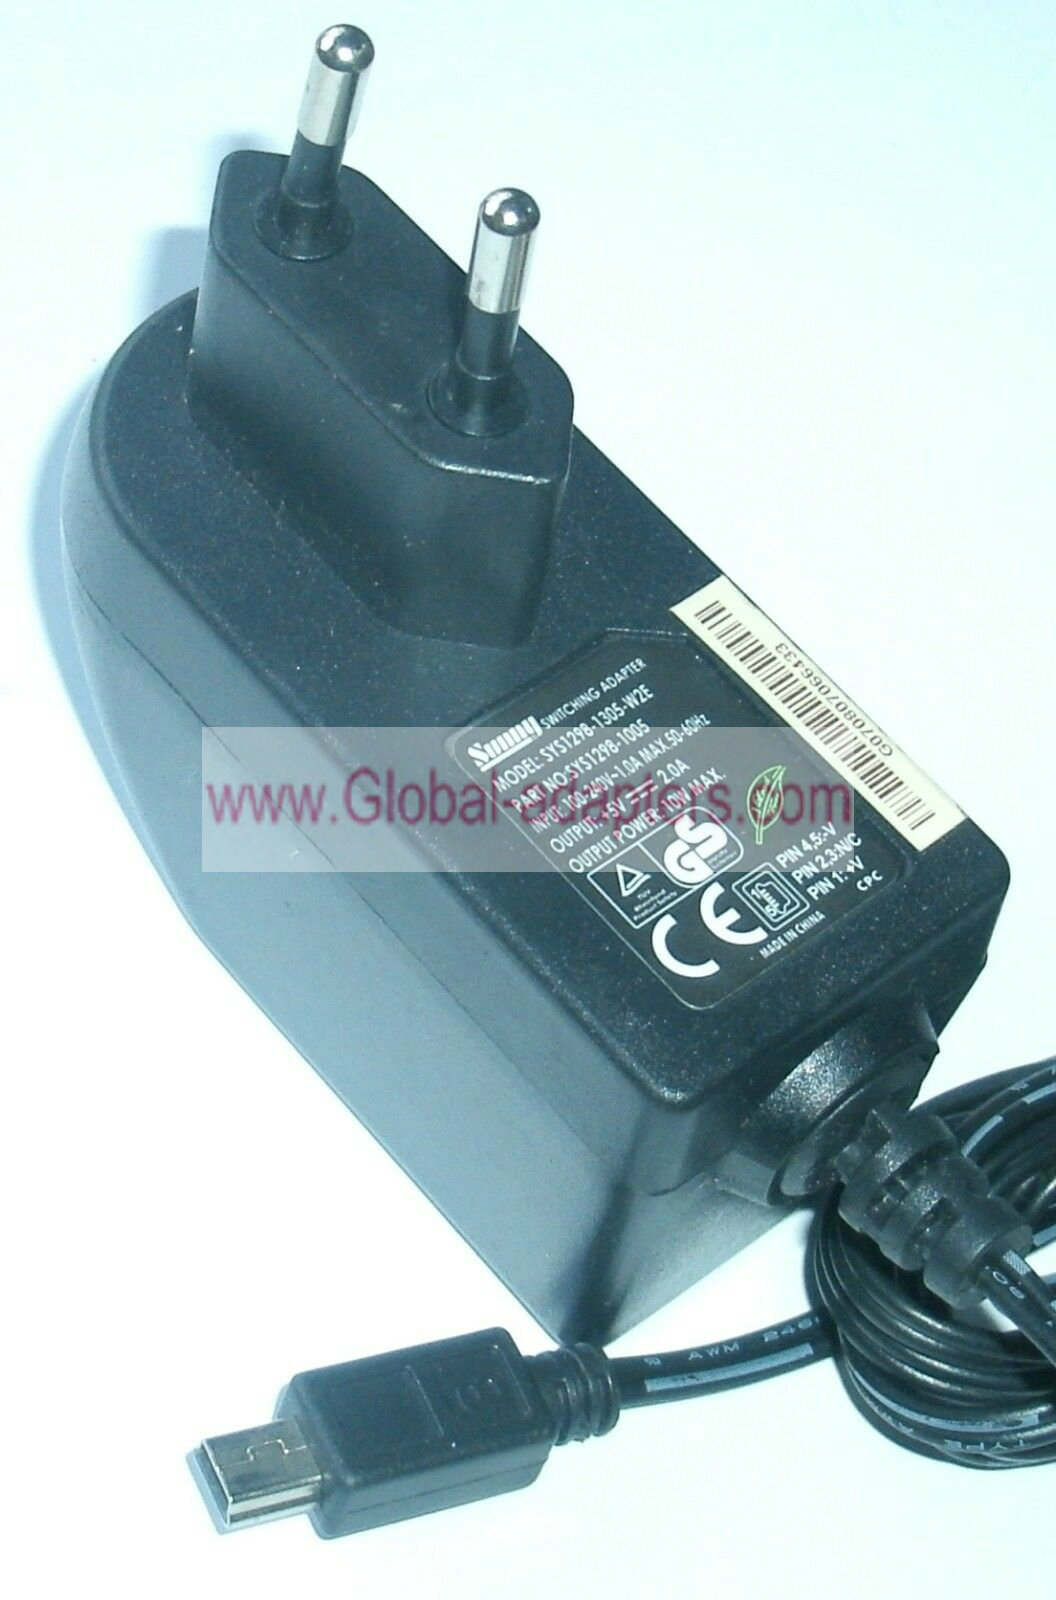 NEW SUNNY SYS1298-1305-W2E SYS1298-1005 5V 2.0A SWITCHING ADAPTER